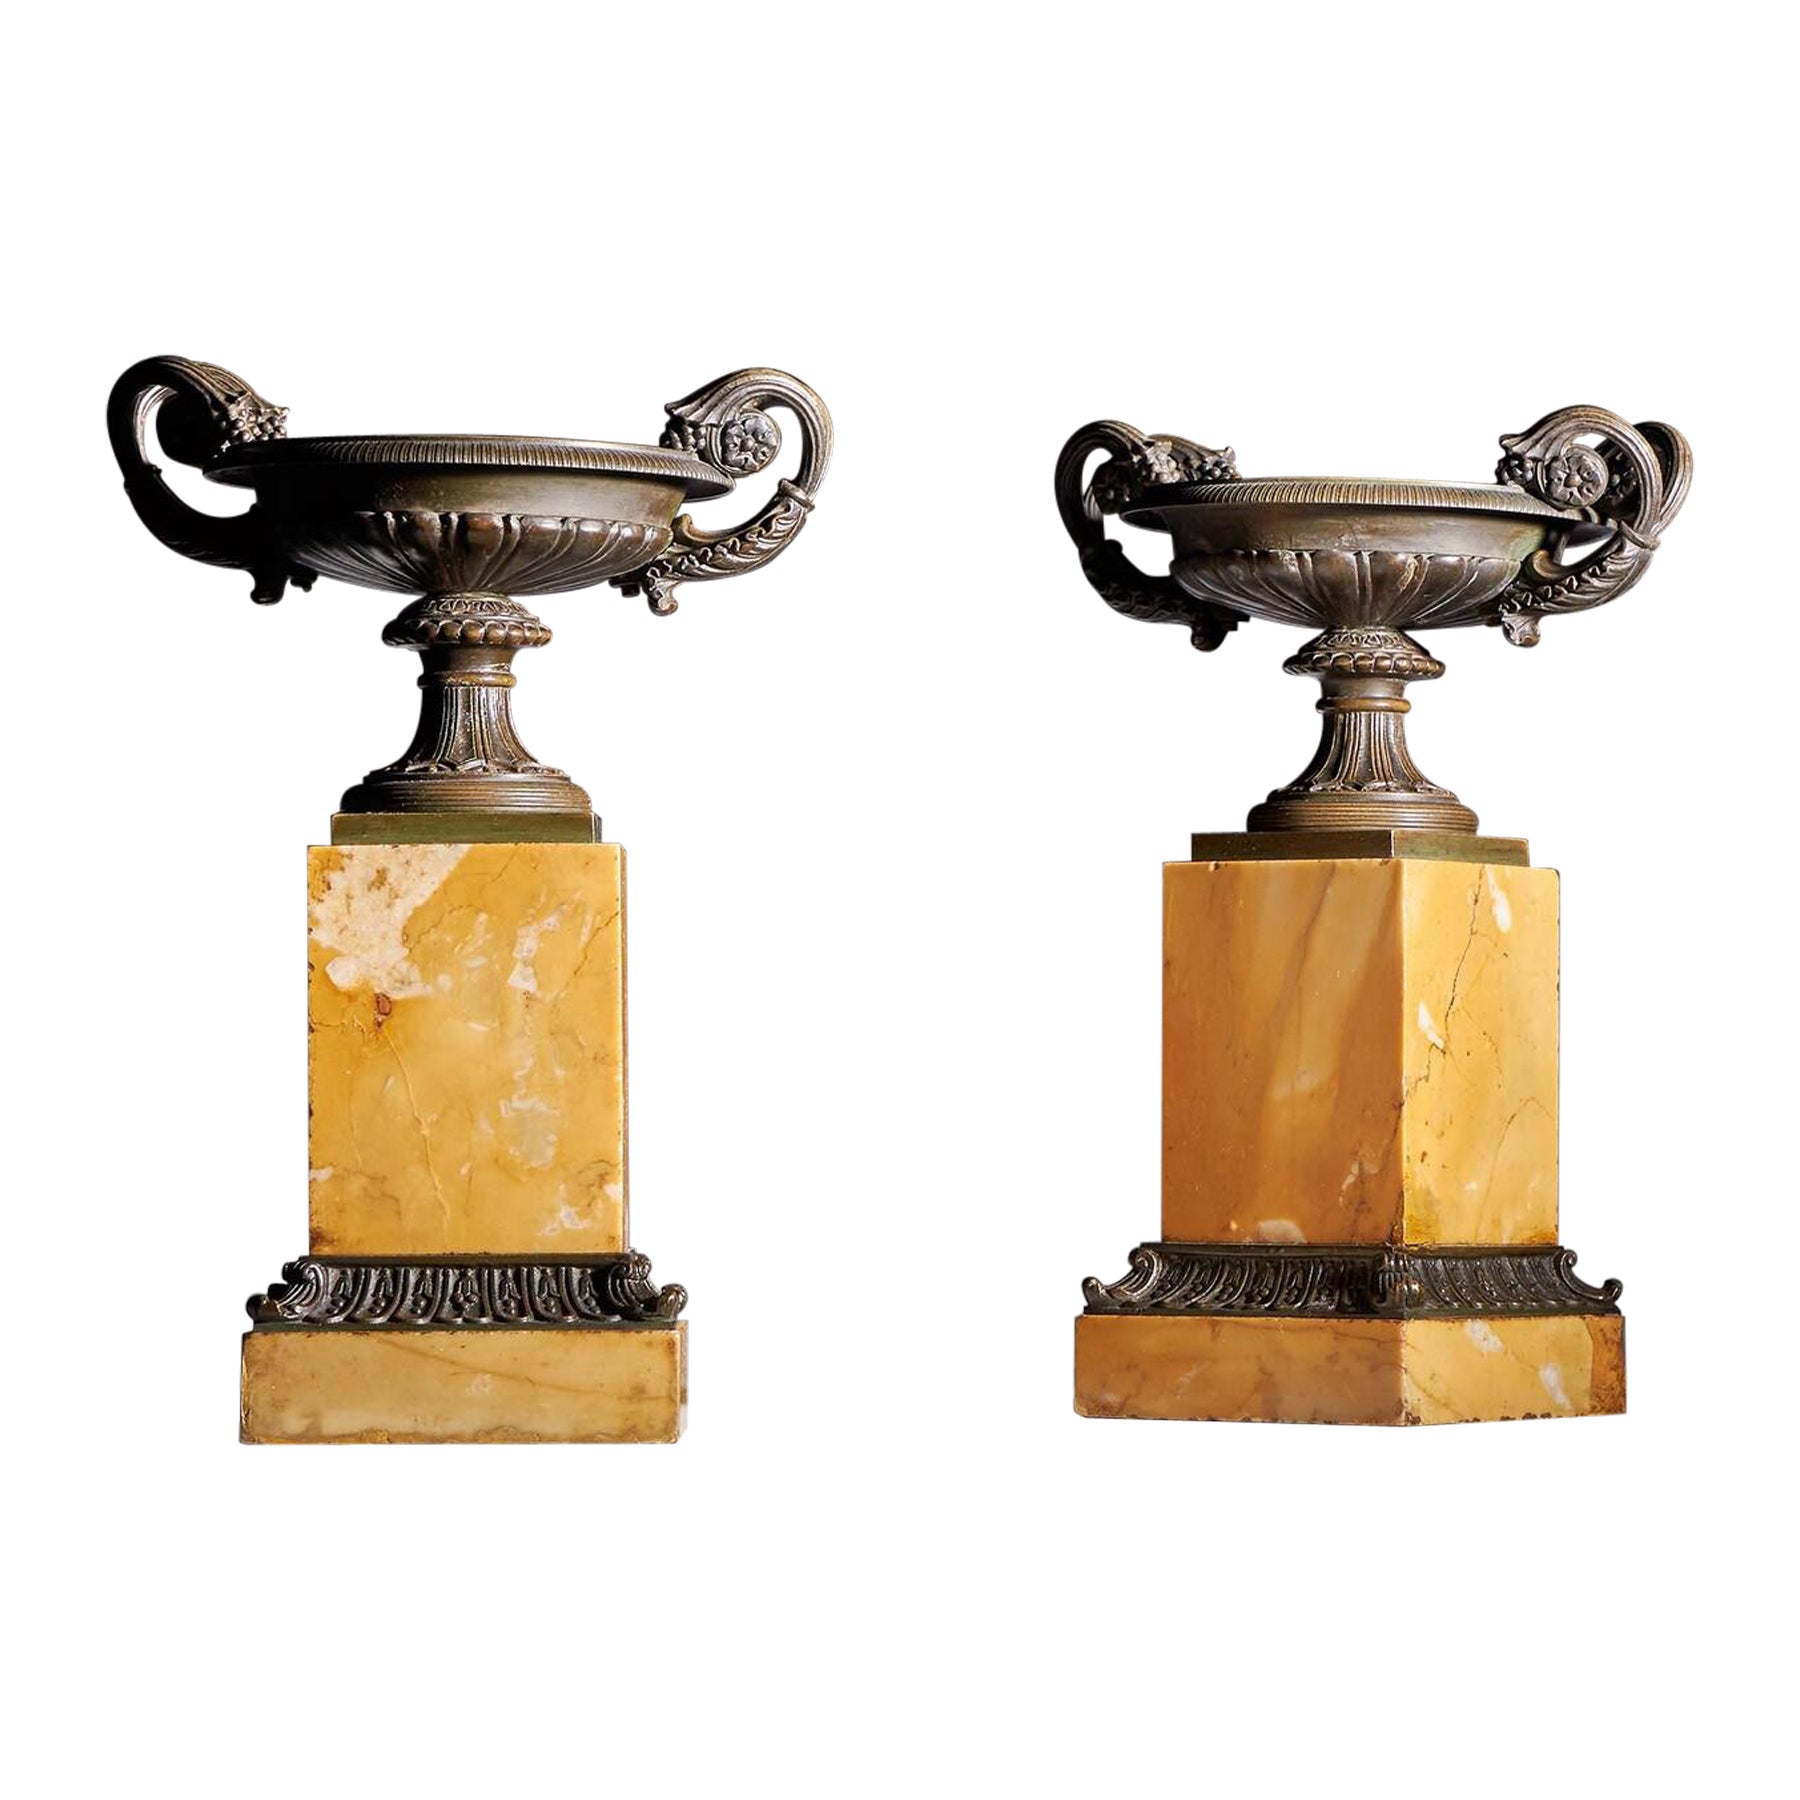 A Very Fine and Large Pair of Early 19th Century French Bronze and Marble Tazzas